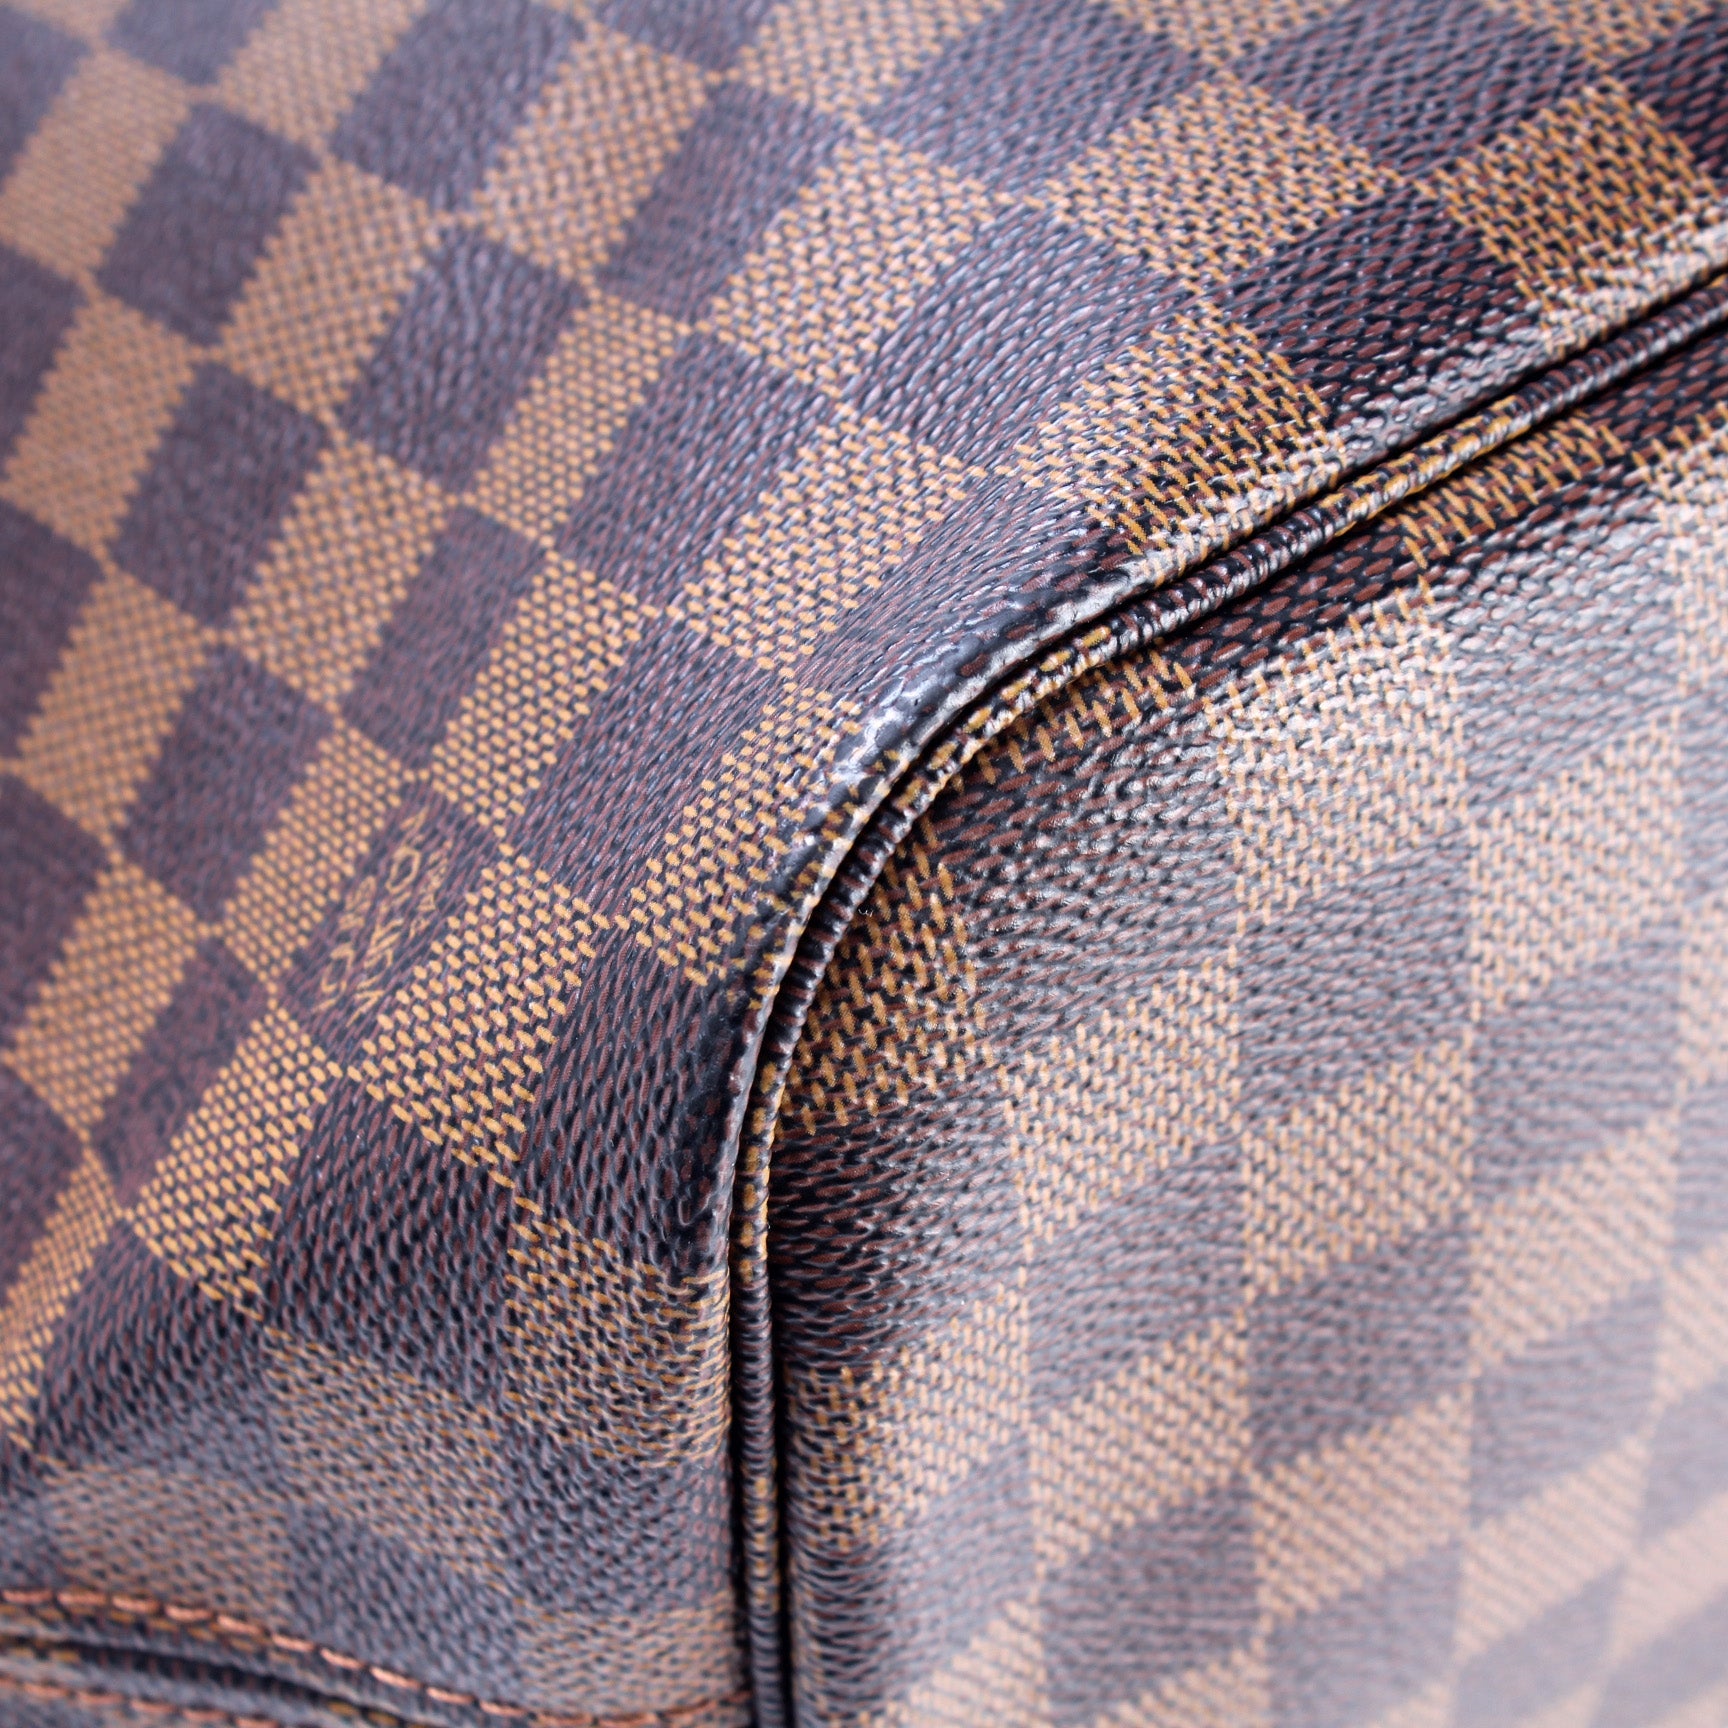 Authentic Neverfull mm damier ebene in very great condition!!! (GI4153 –  MKS BRAND